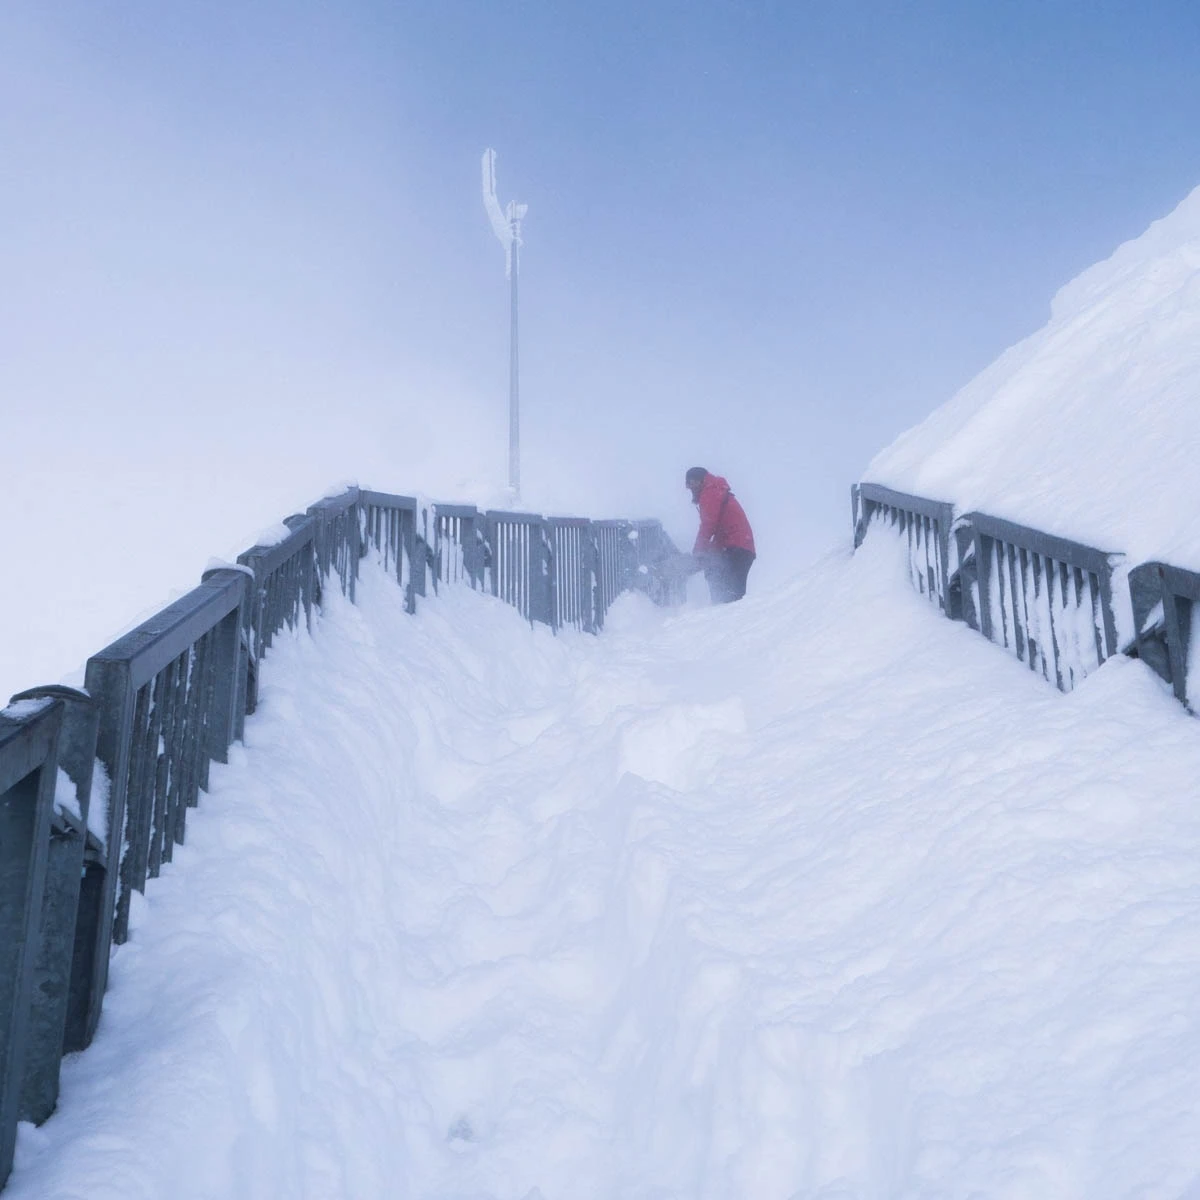 hip-high powdery snow has blown into a walkway, a man in red at the top digging it out under a blue sky